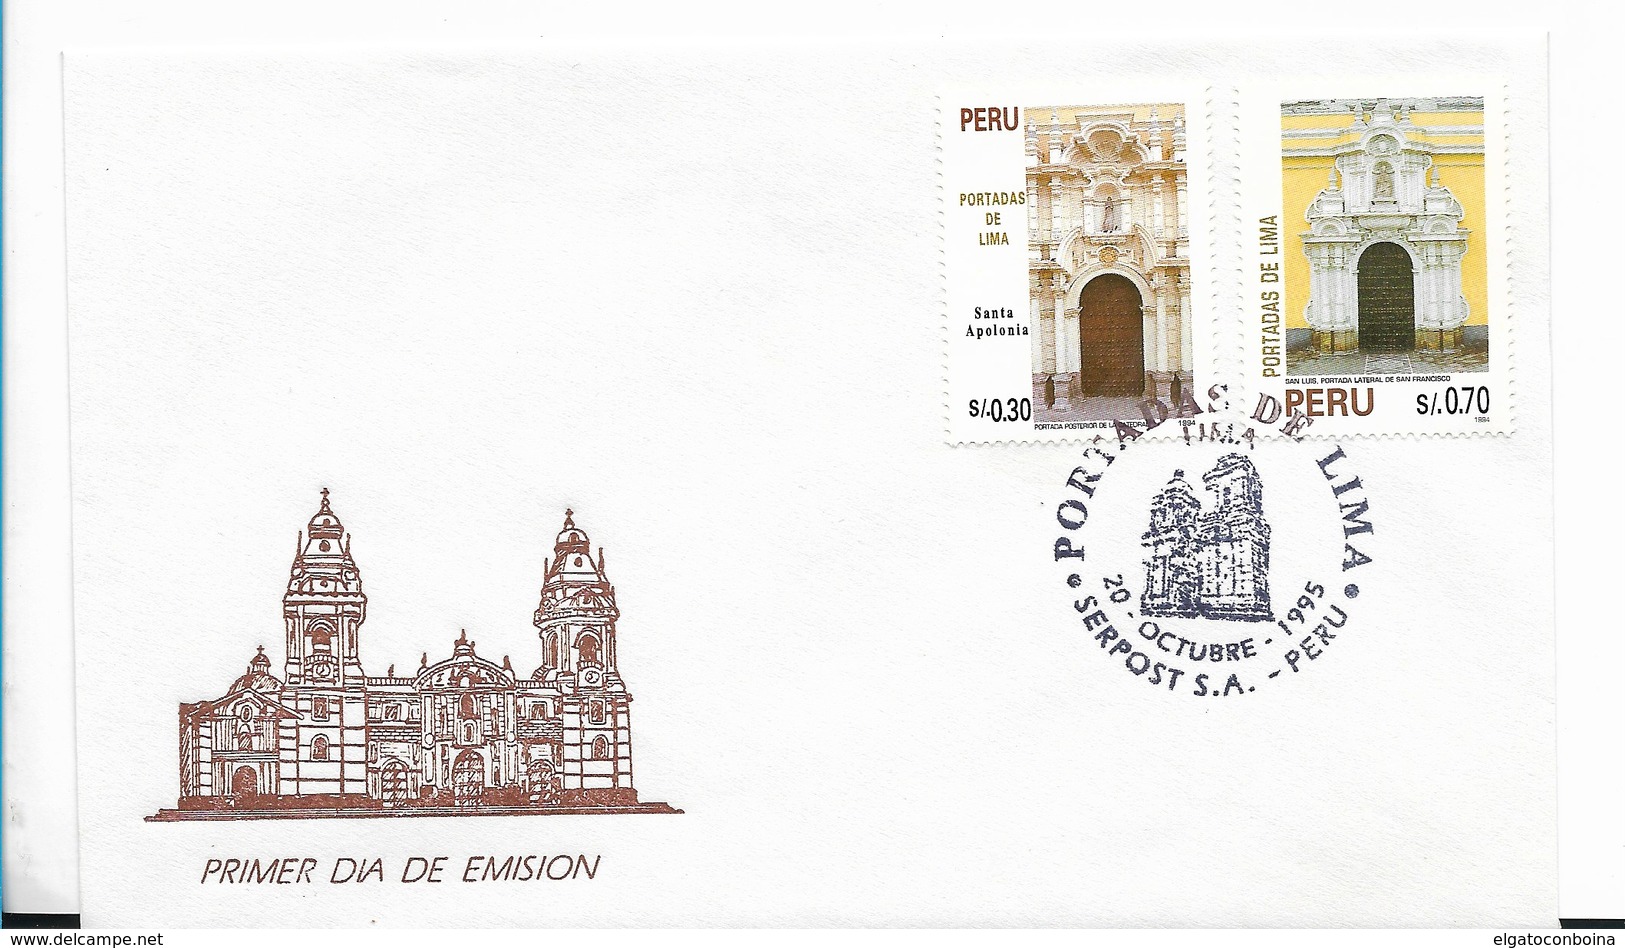 PERU 1995 Lima Cathedrals Architecture Buildings FDC First Day Cover Scott 1119-20 - Perù